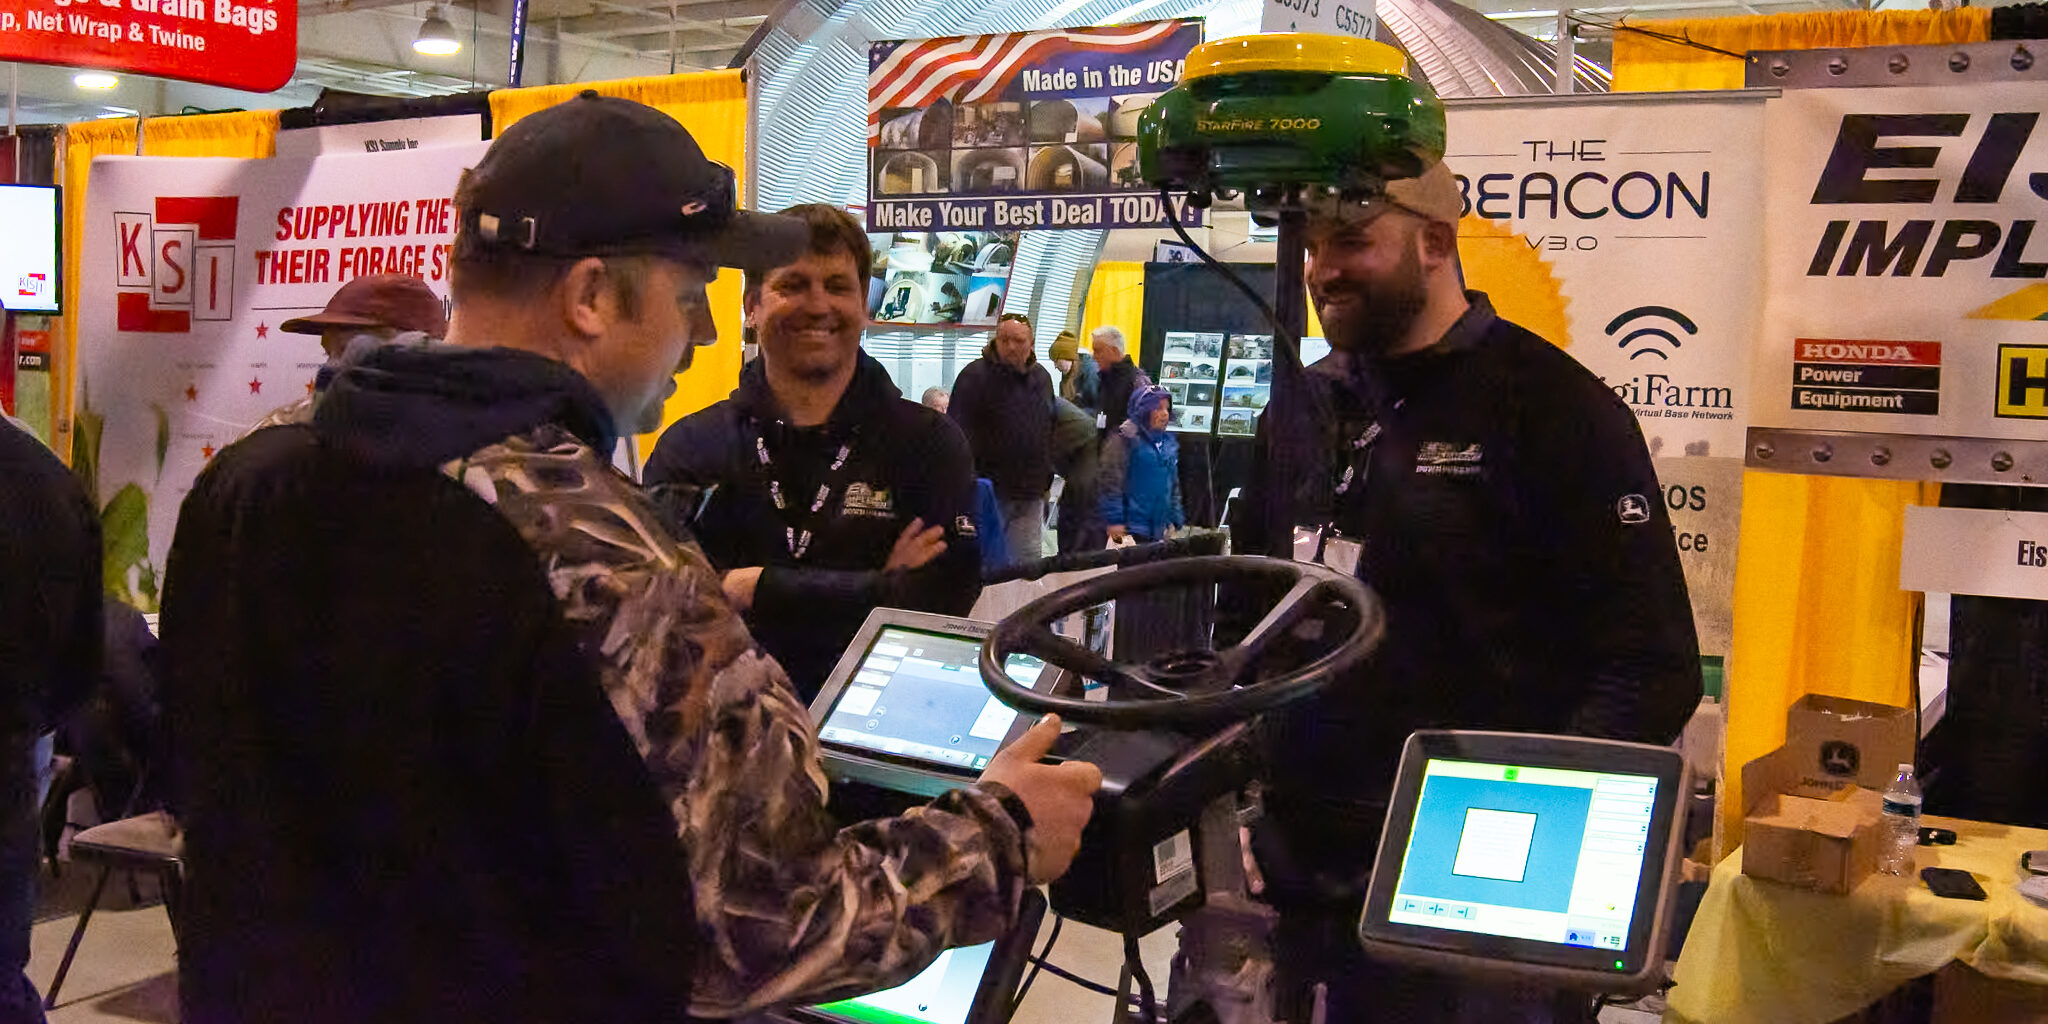 A man looks at a digital steering display while speaking to two representatives of an exhibitor at the WPS Farm Show.